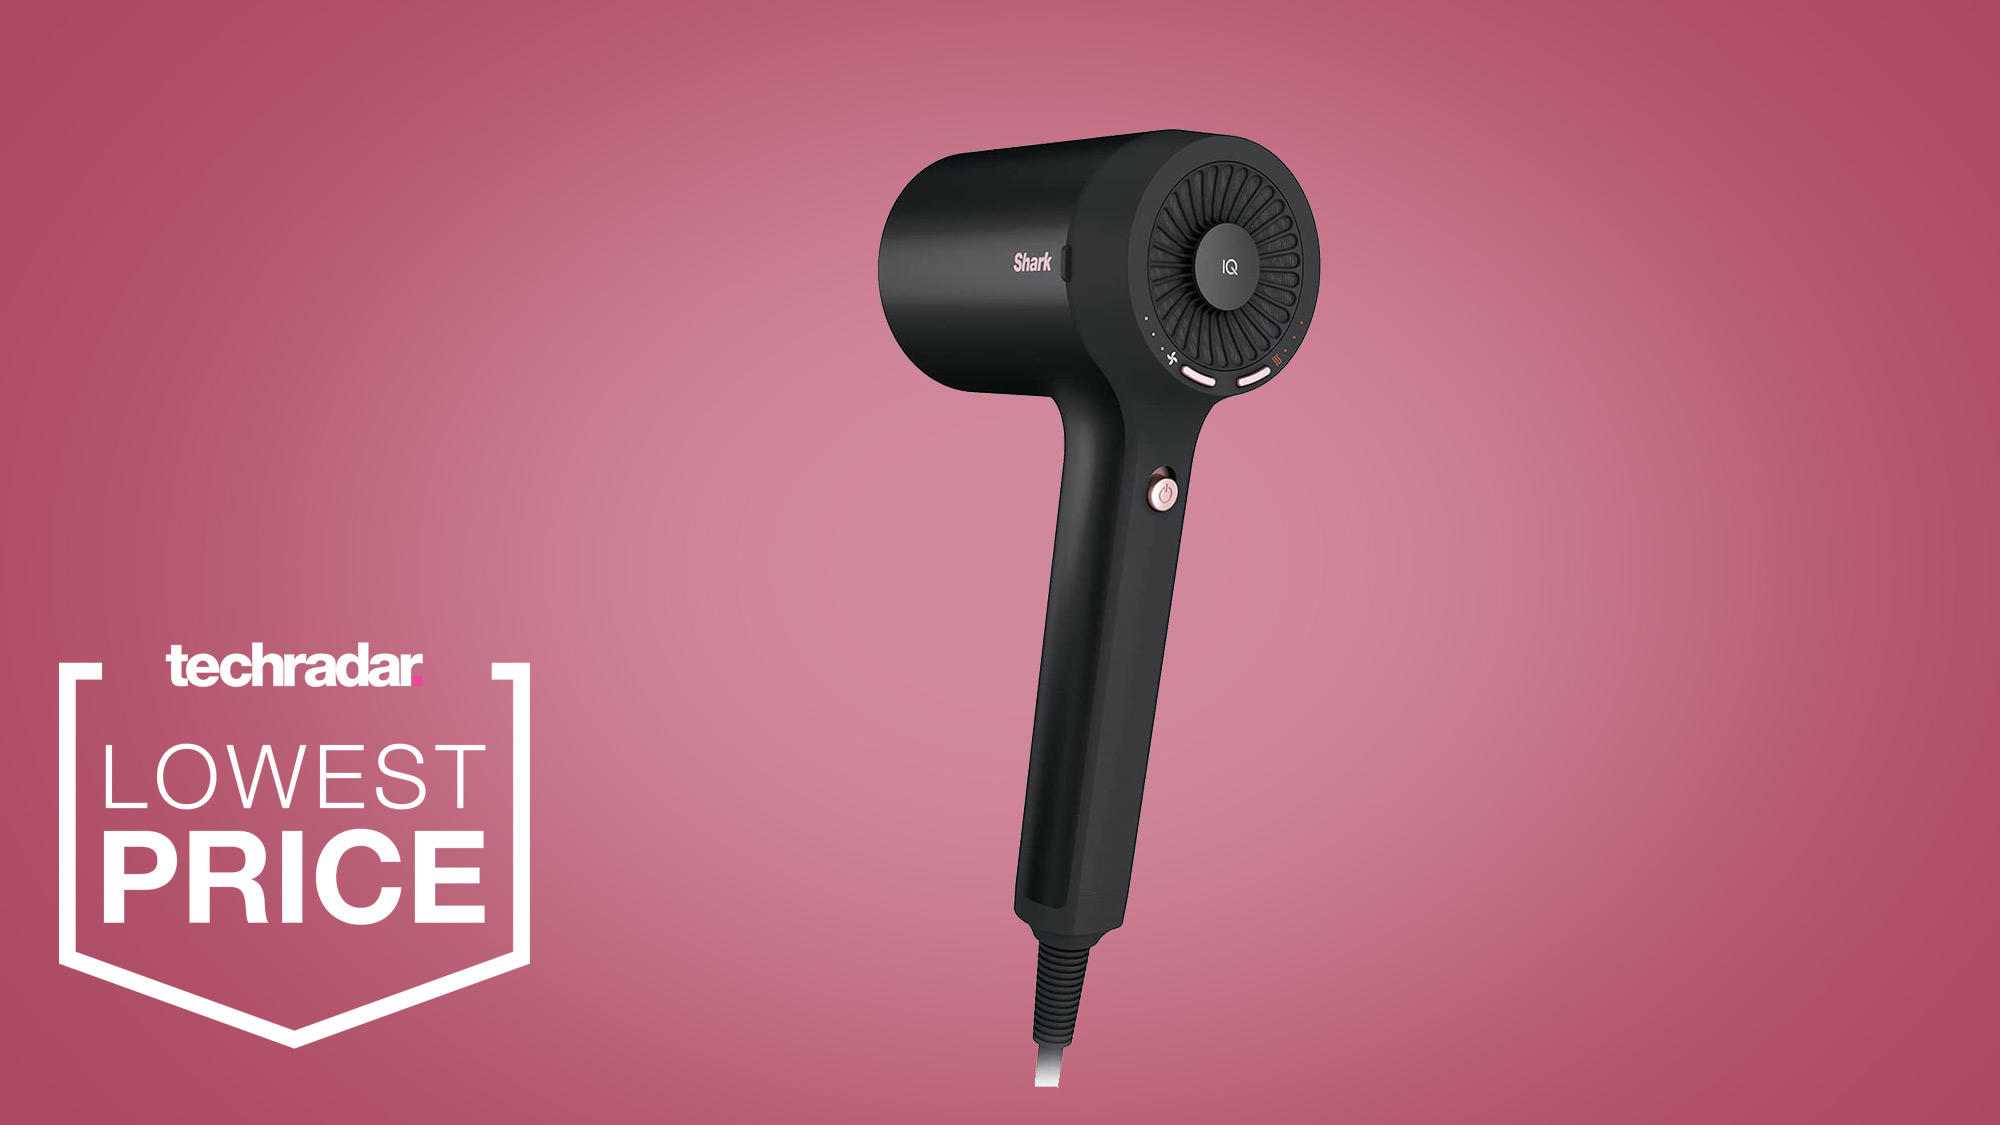 This intelligent Shark hair dryer is back down to its lowest-ever price |  TechRadar